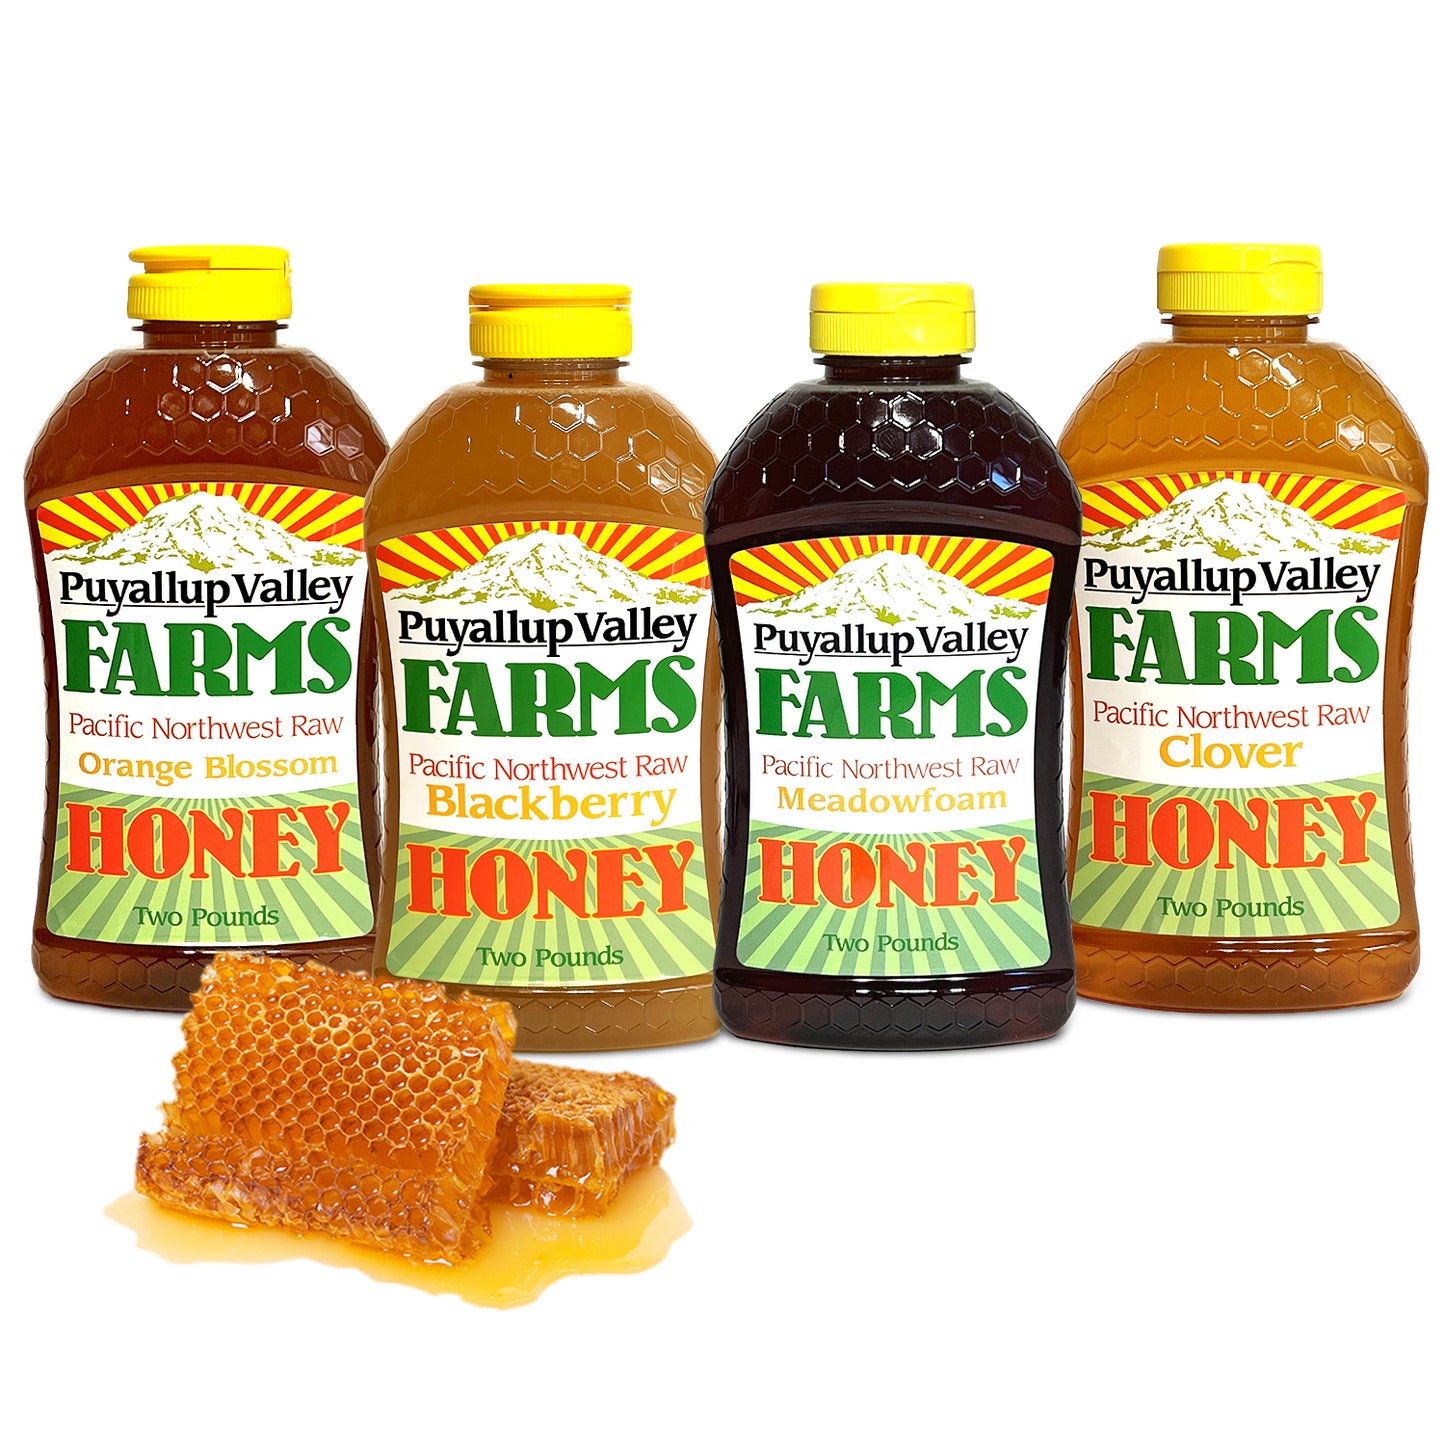 B Honey Gift Box by Puyallup Valley Farms | All-Natural Sweetener | No Additives | Non-Pasteurized Organic Raw Honey | Raw Honey Comes in 4-2lb Squeeze Bottles | Gift Box Includes Four Different Flavors | Free Shipping 128 Oz.